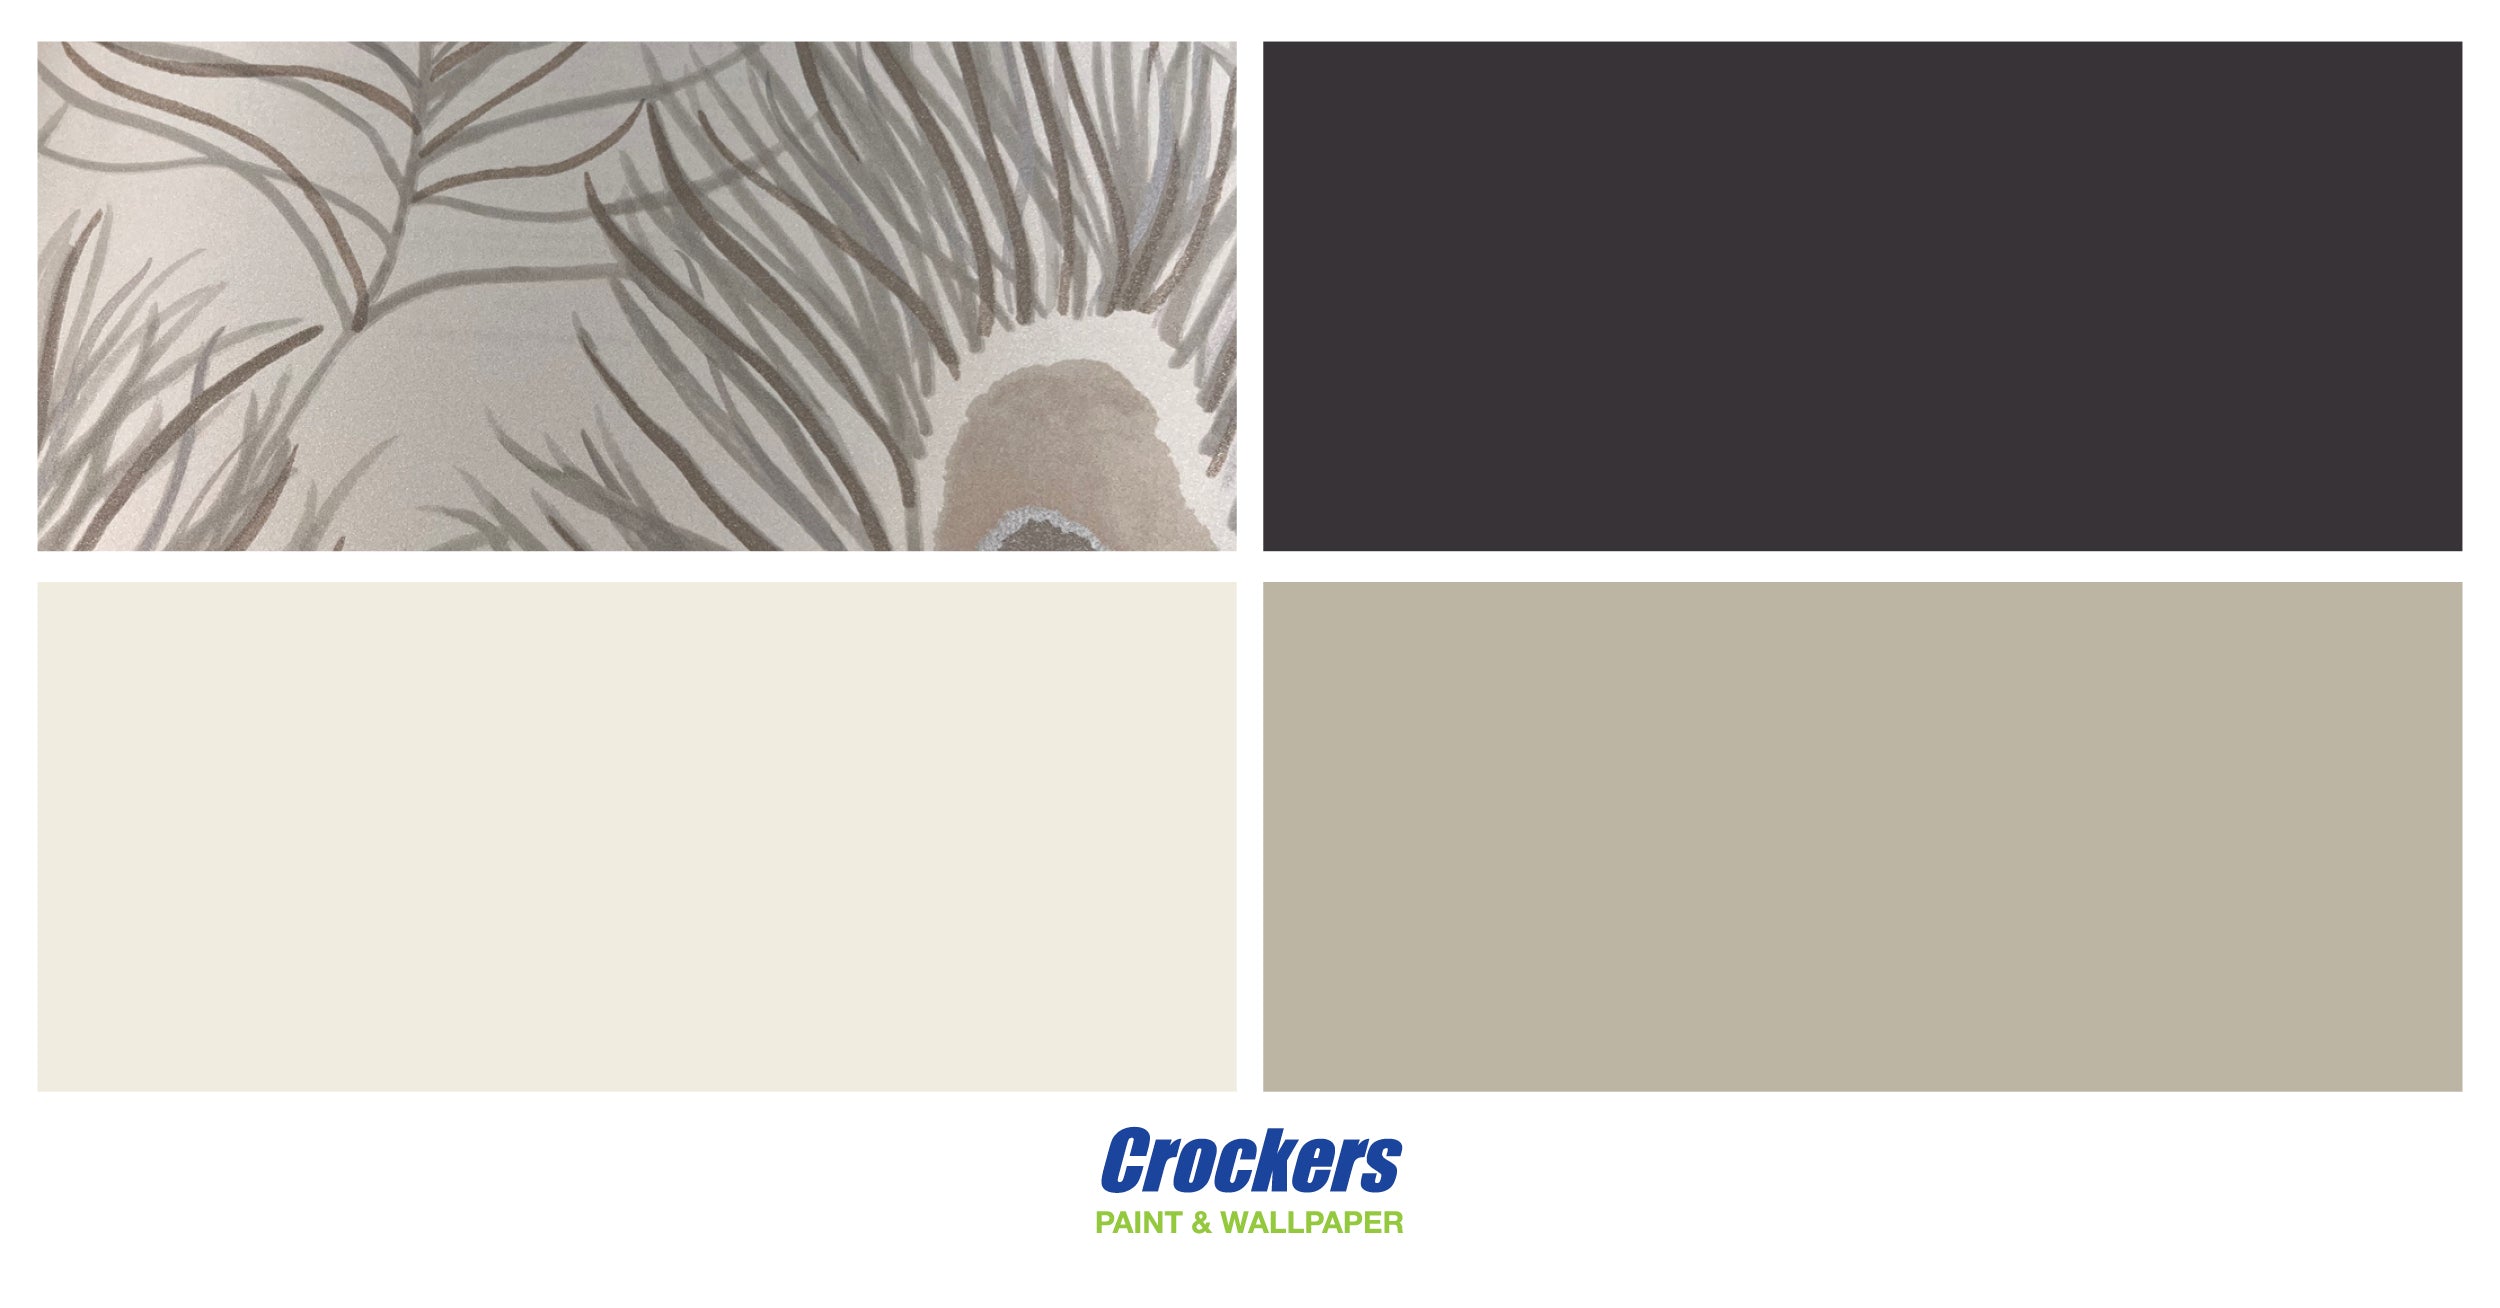 The ultimate guide to picking colours for your home - Crockers Paint & Wallpaper